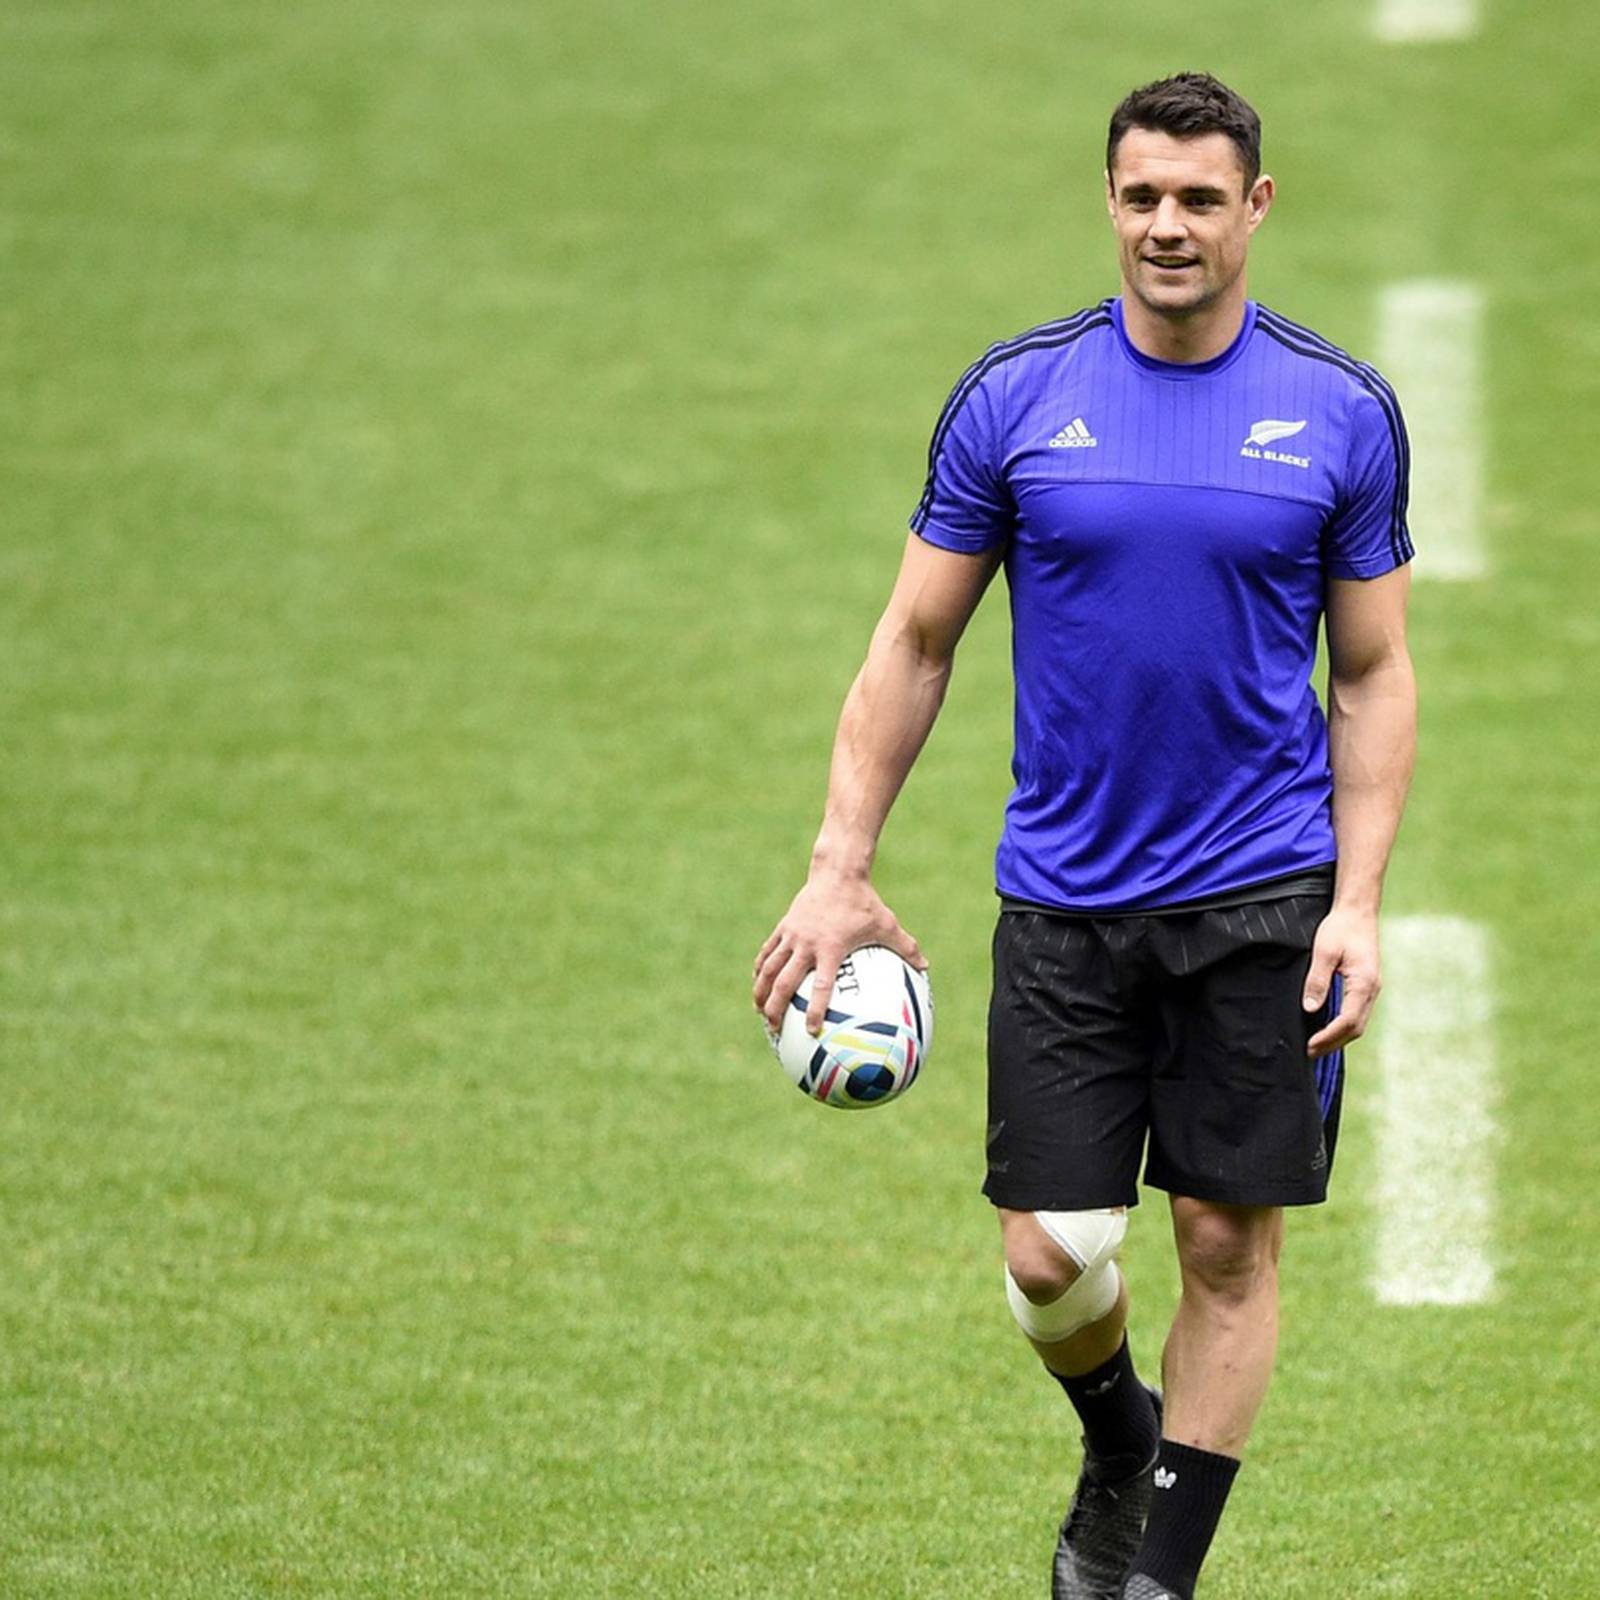 Injured Dan Carter offers support to Colin Slade